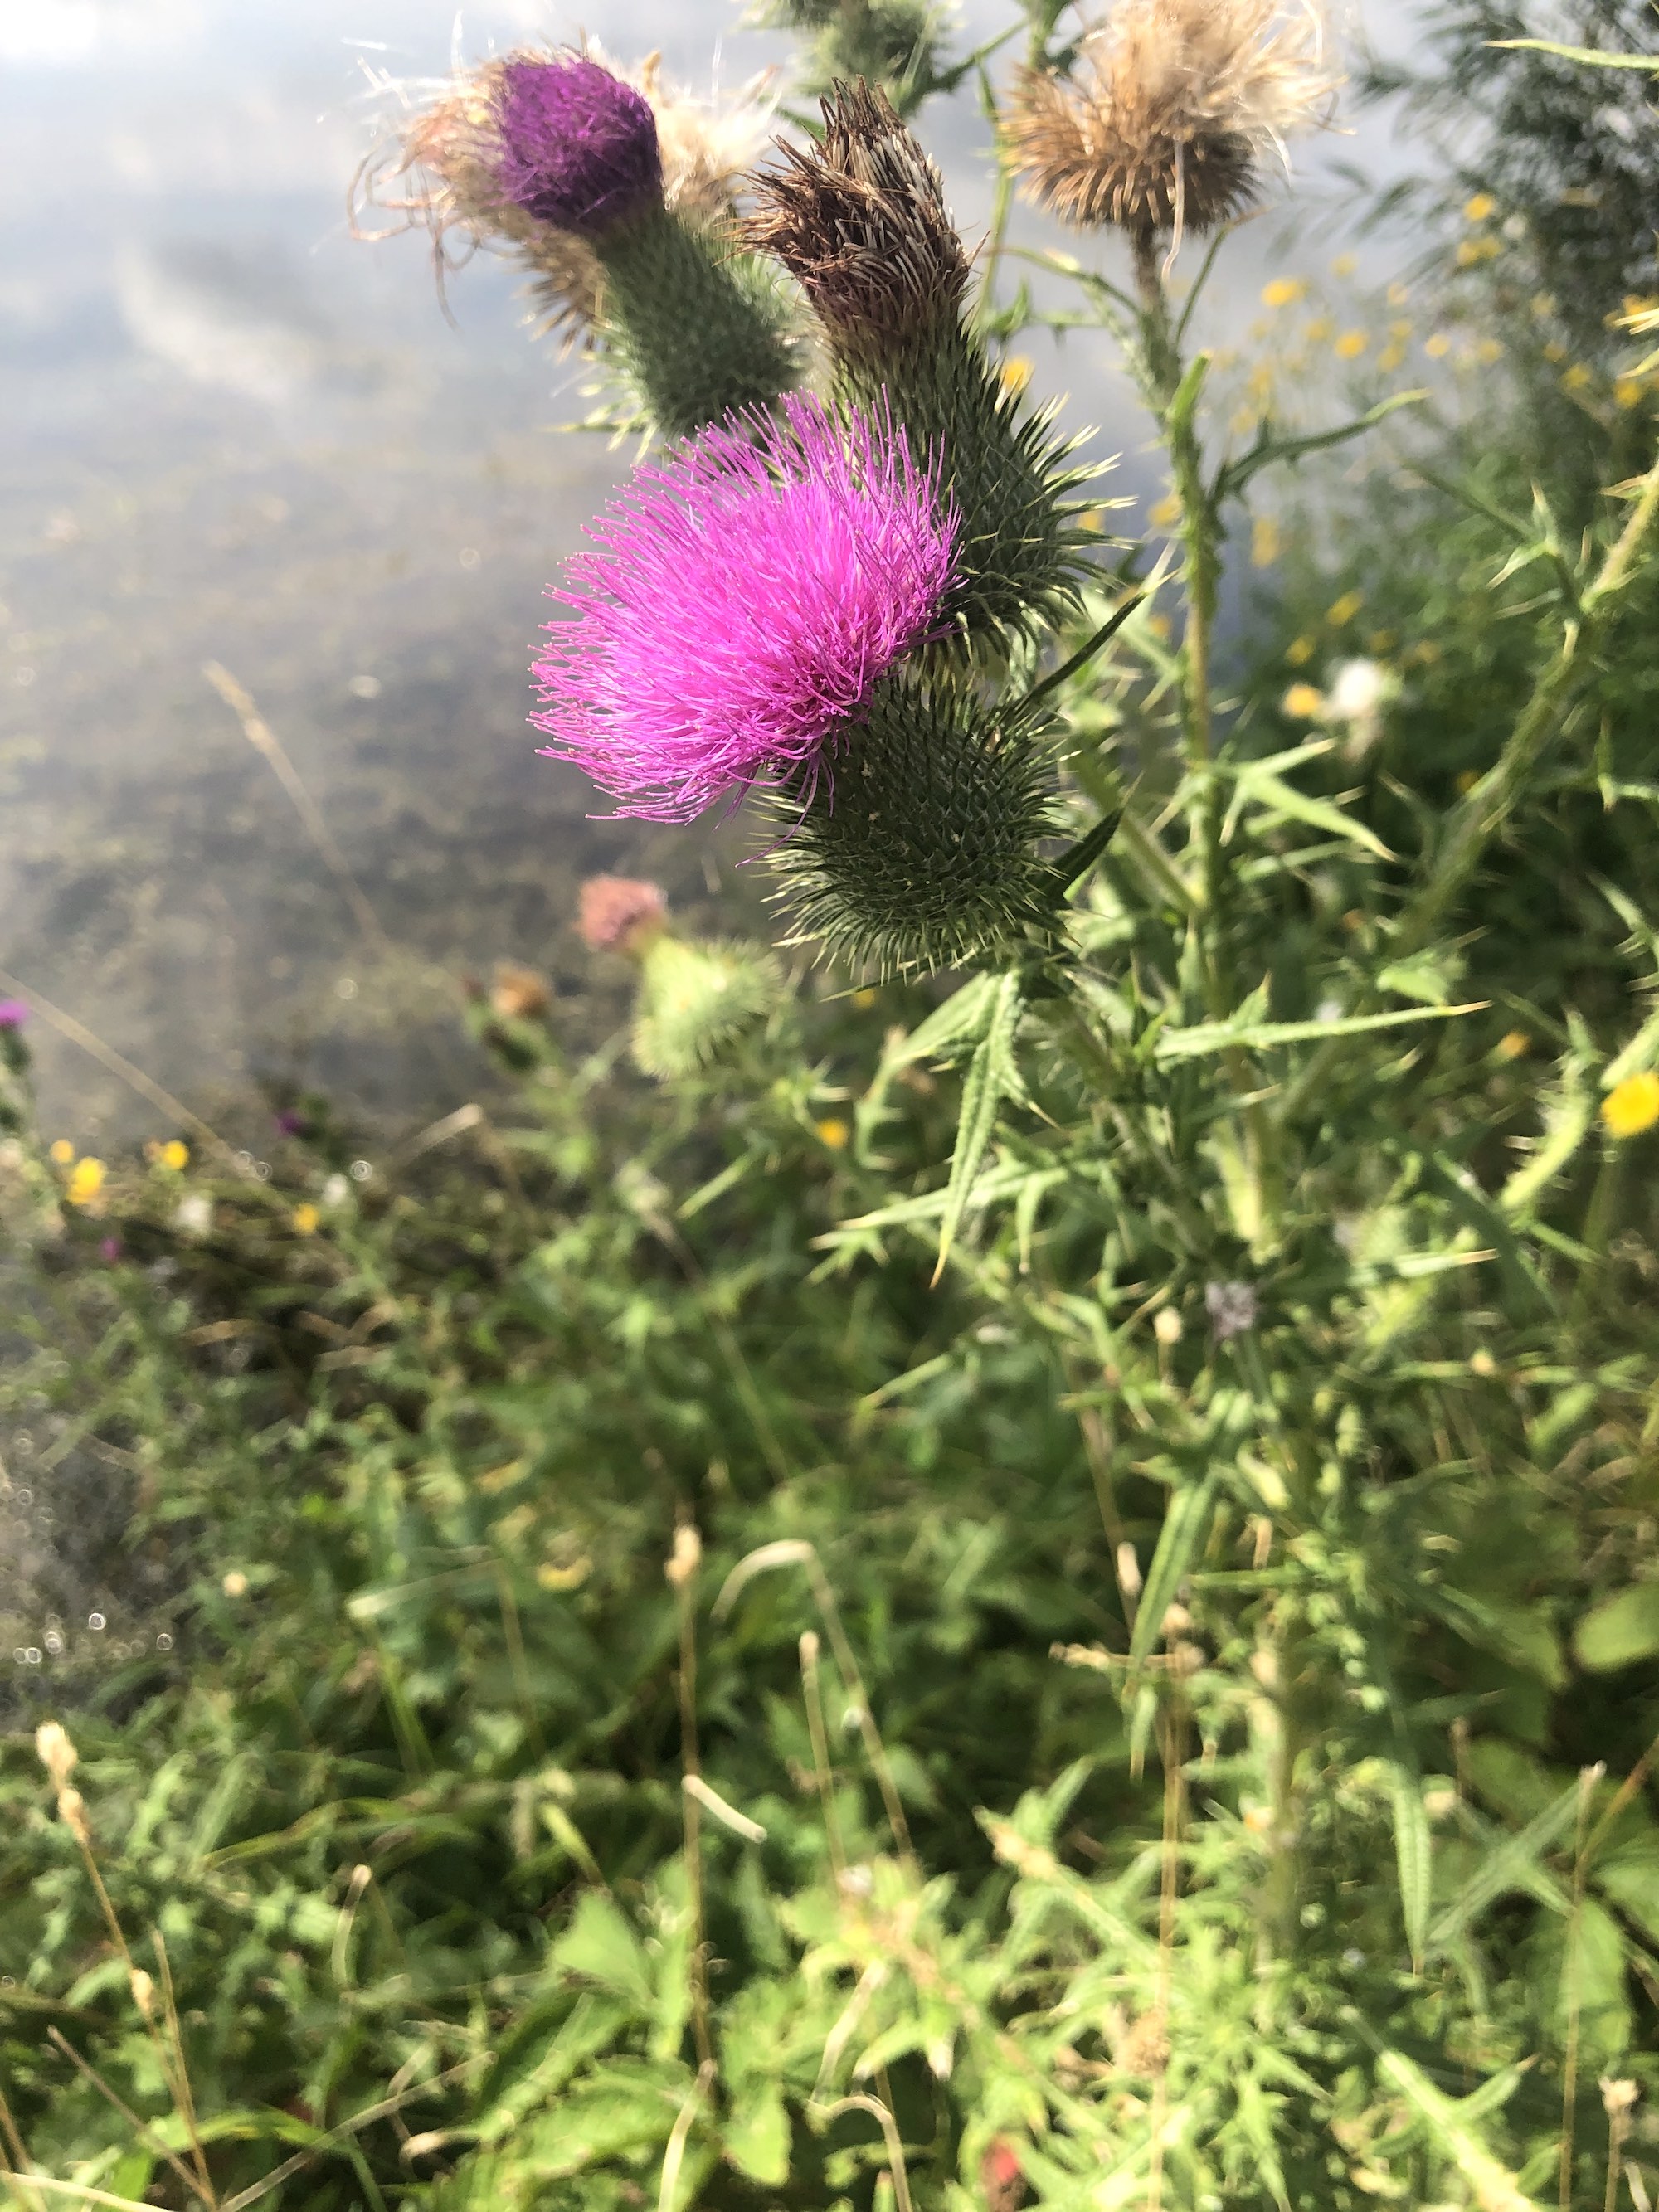 Bull Thistle along shore of Lake Wingra in Vilas Park in Madison, Wisconsin on August 15, 2022.